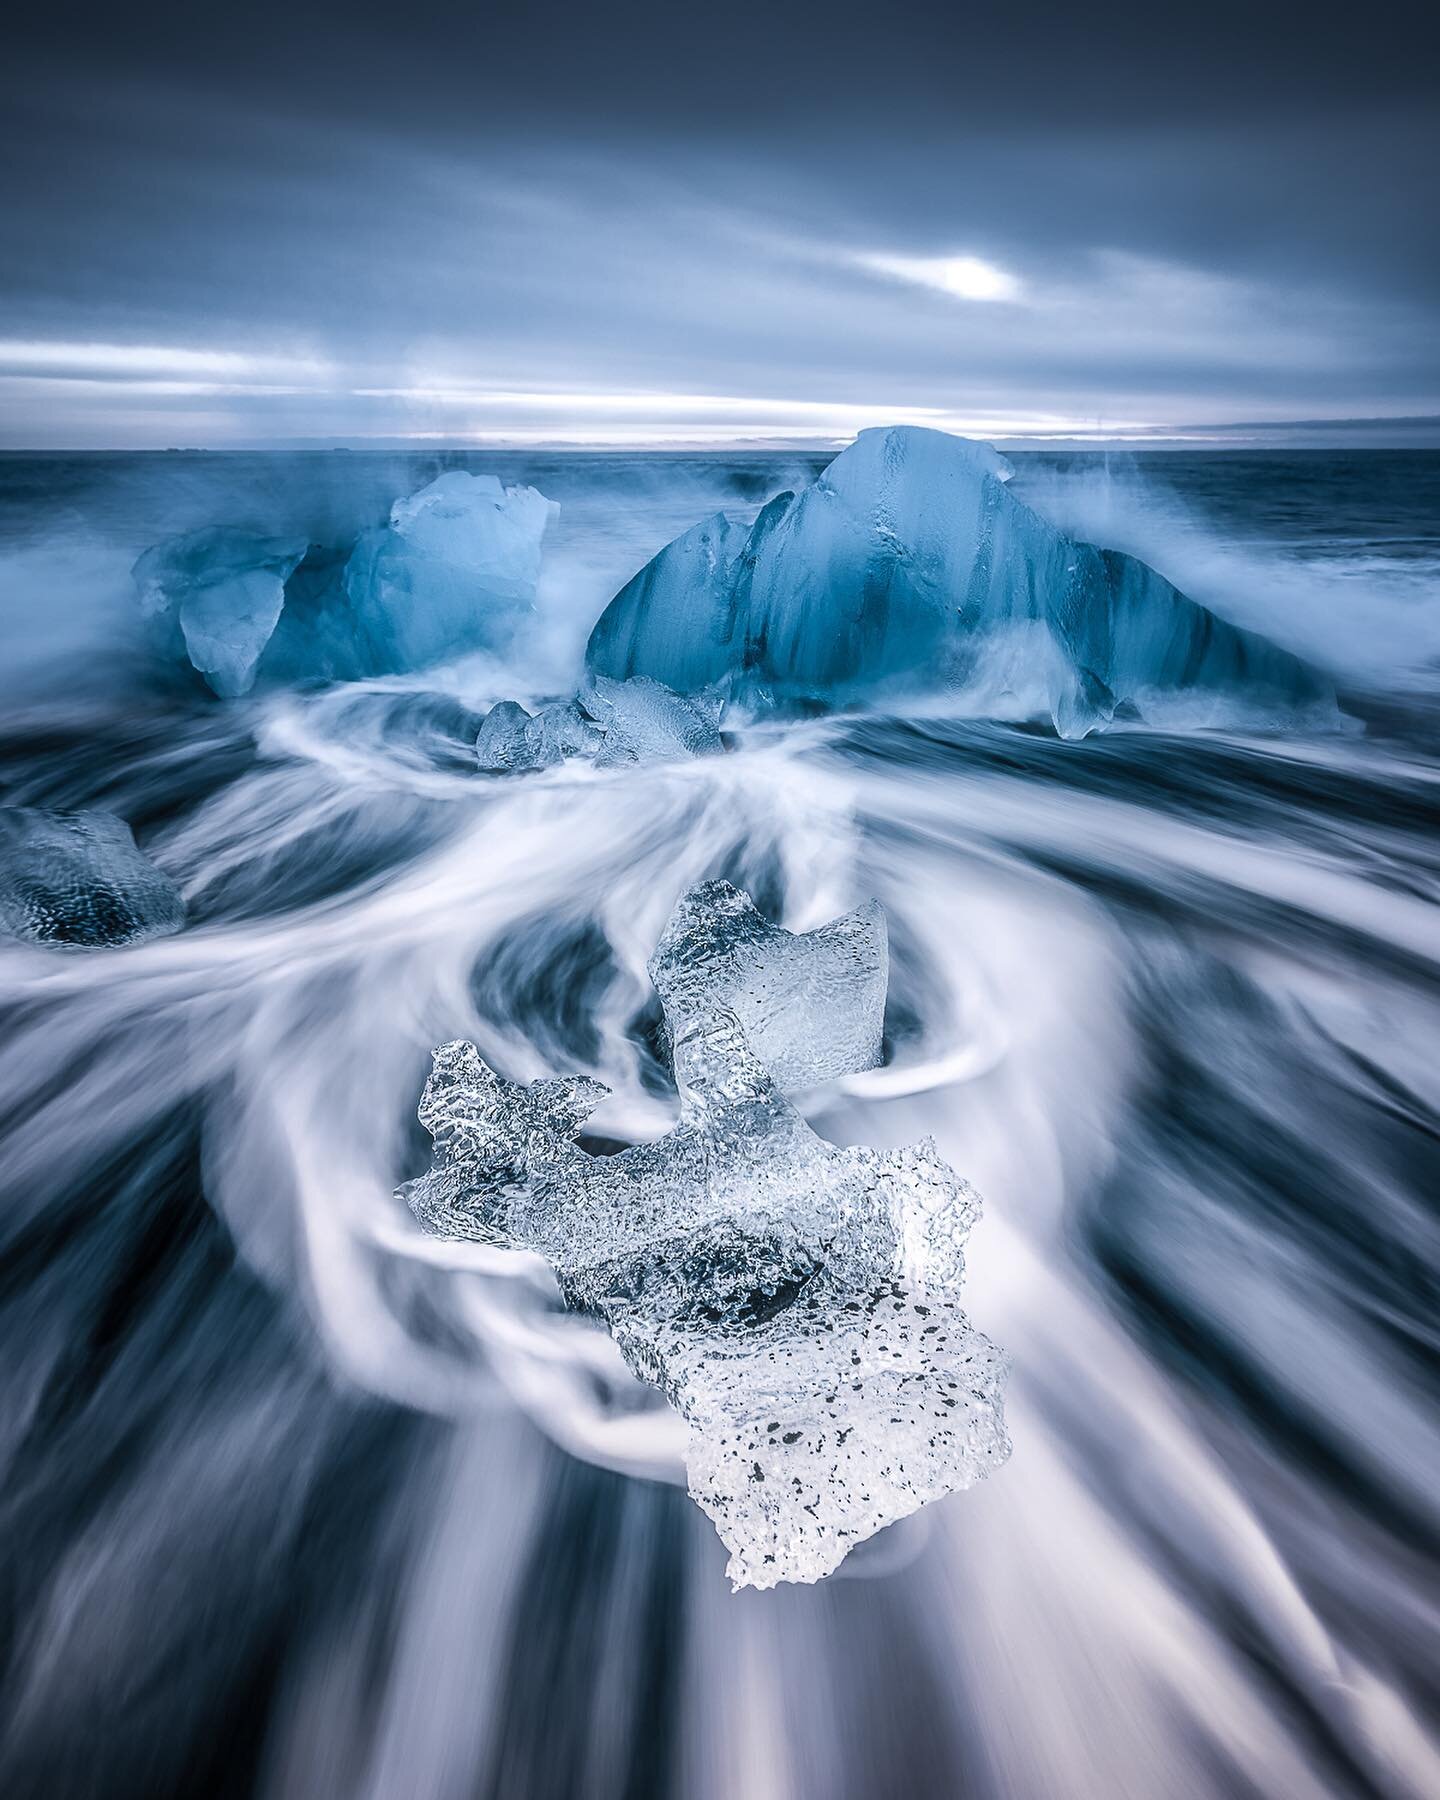 boʊn iːˈvɛər - the good winter

Whether over in Iceland or here in New Zealand, winter is my favourite time to adventure and photograph nature at its&rsquo; raw and rugged beautiful best. 💙
-
-
-
-
-
-
-
-
@bbcearth 
@photogear.nz @progearphoto @wha